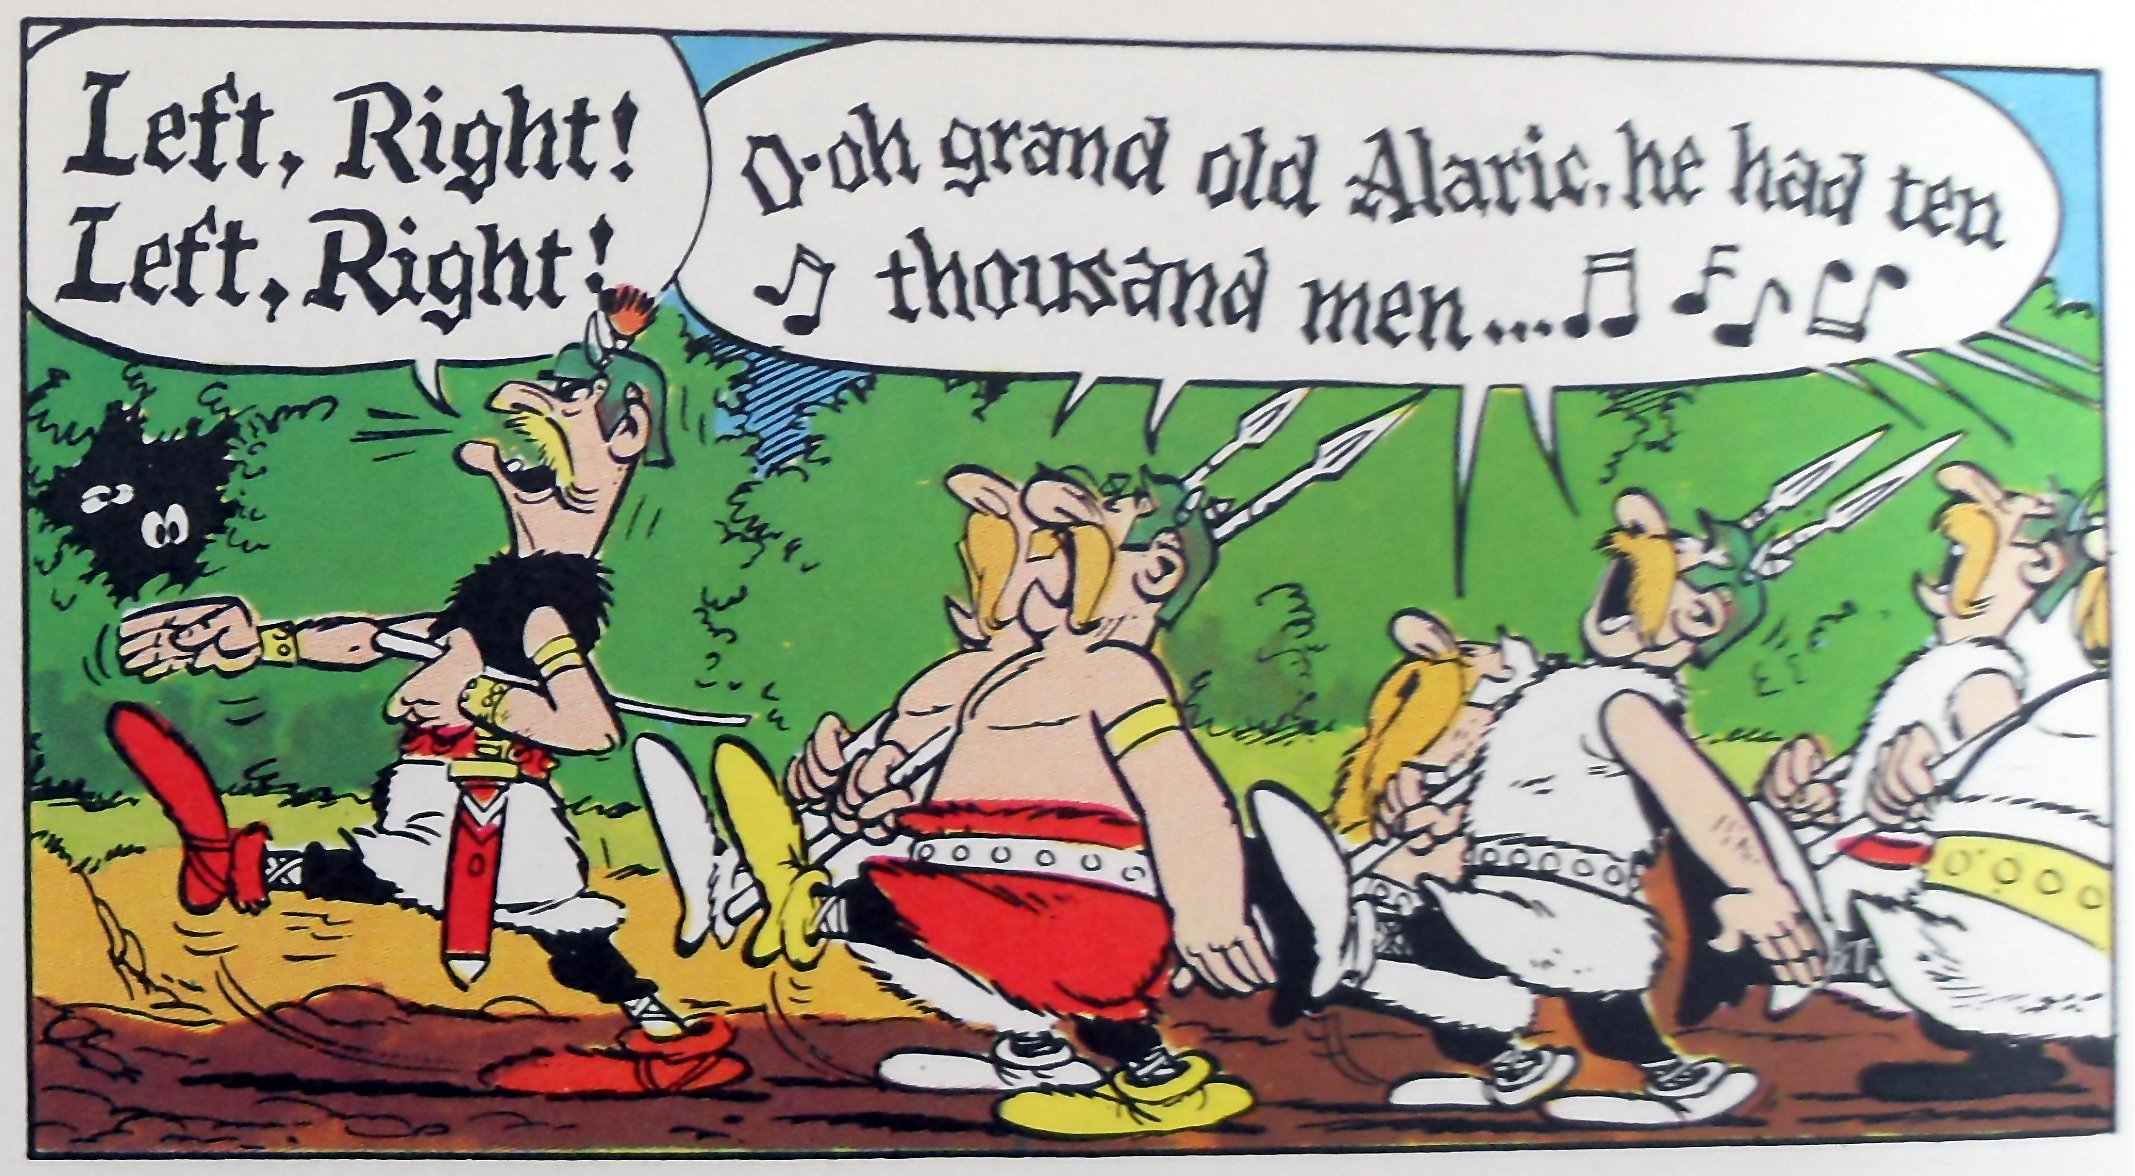 Dear Gauls! We created a Discord - Asterix and Friends